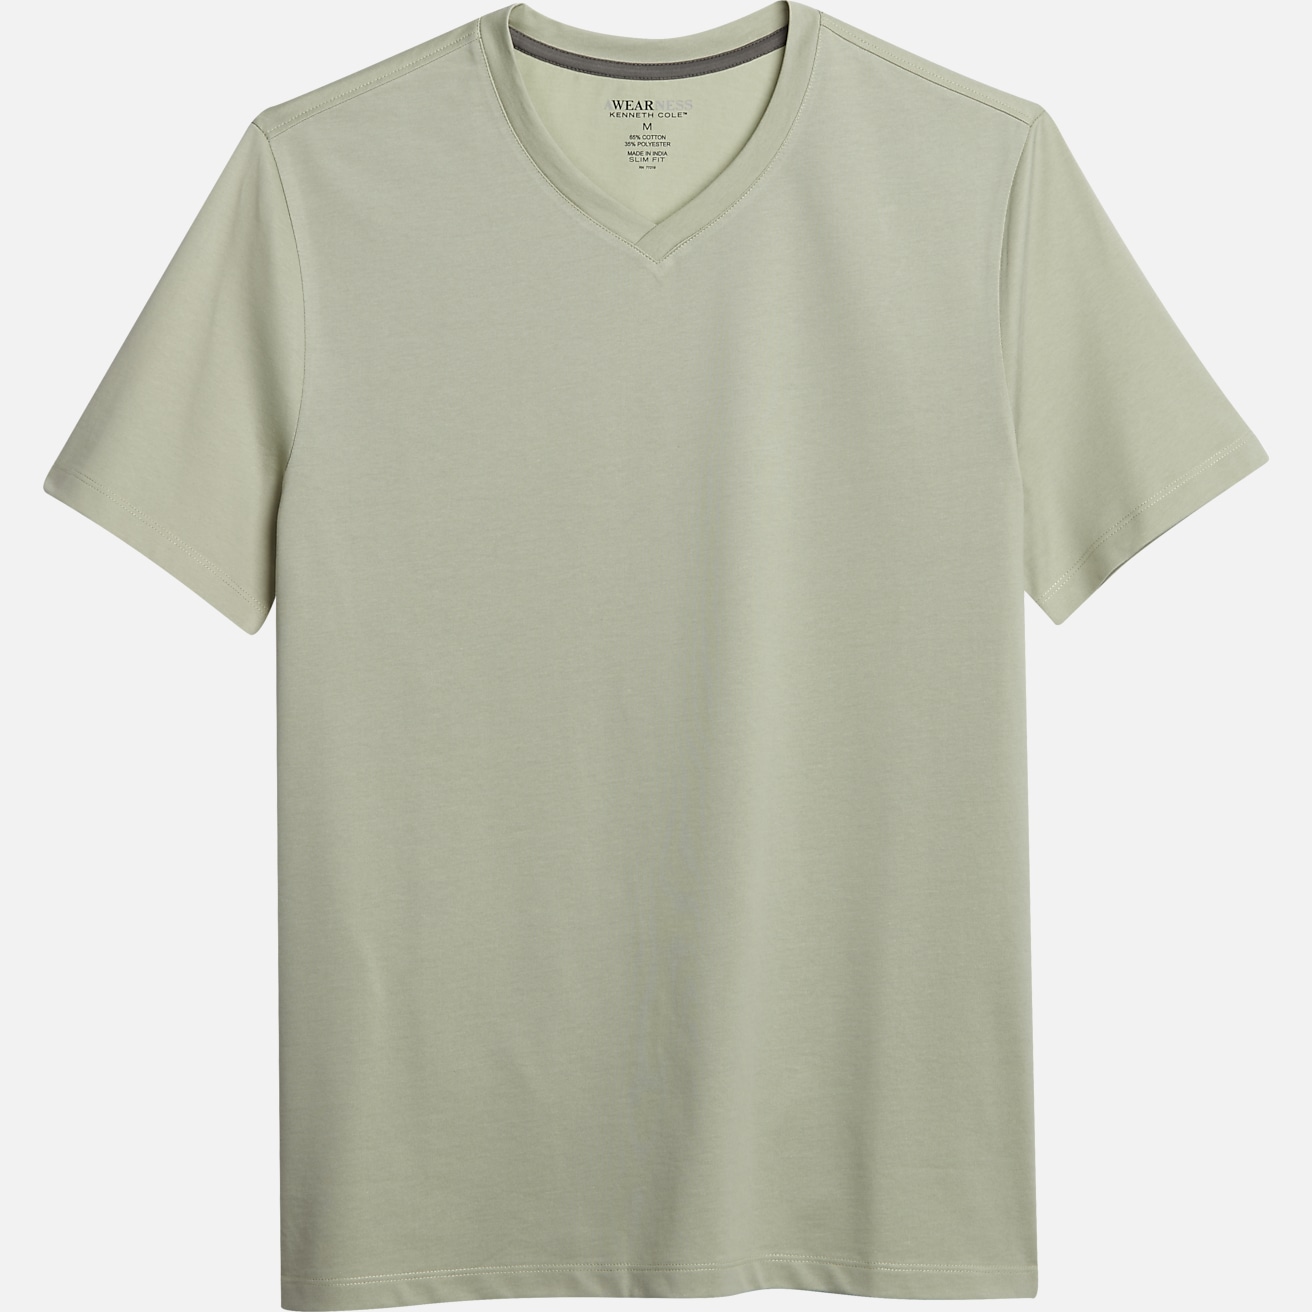 Awearness Kenneth Cole Slim Fit V-Neck T-Shirt, All Sale